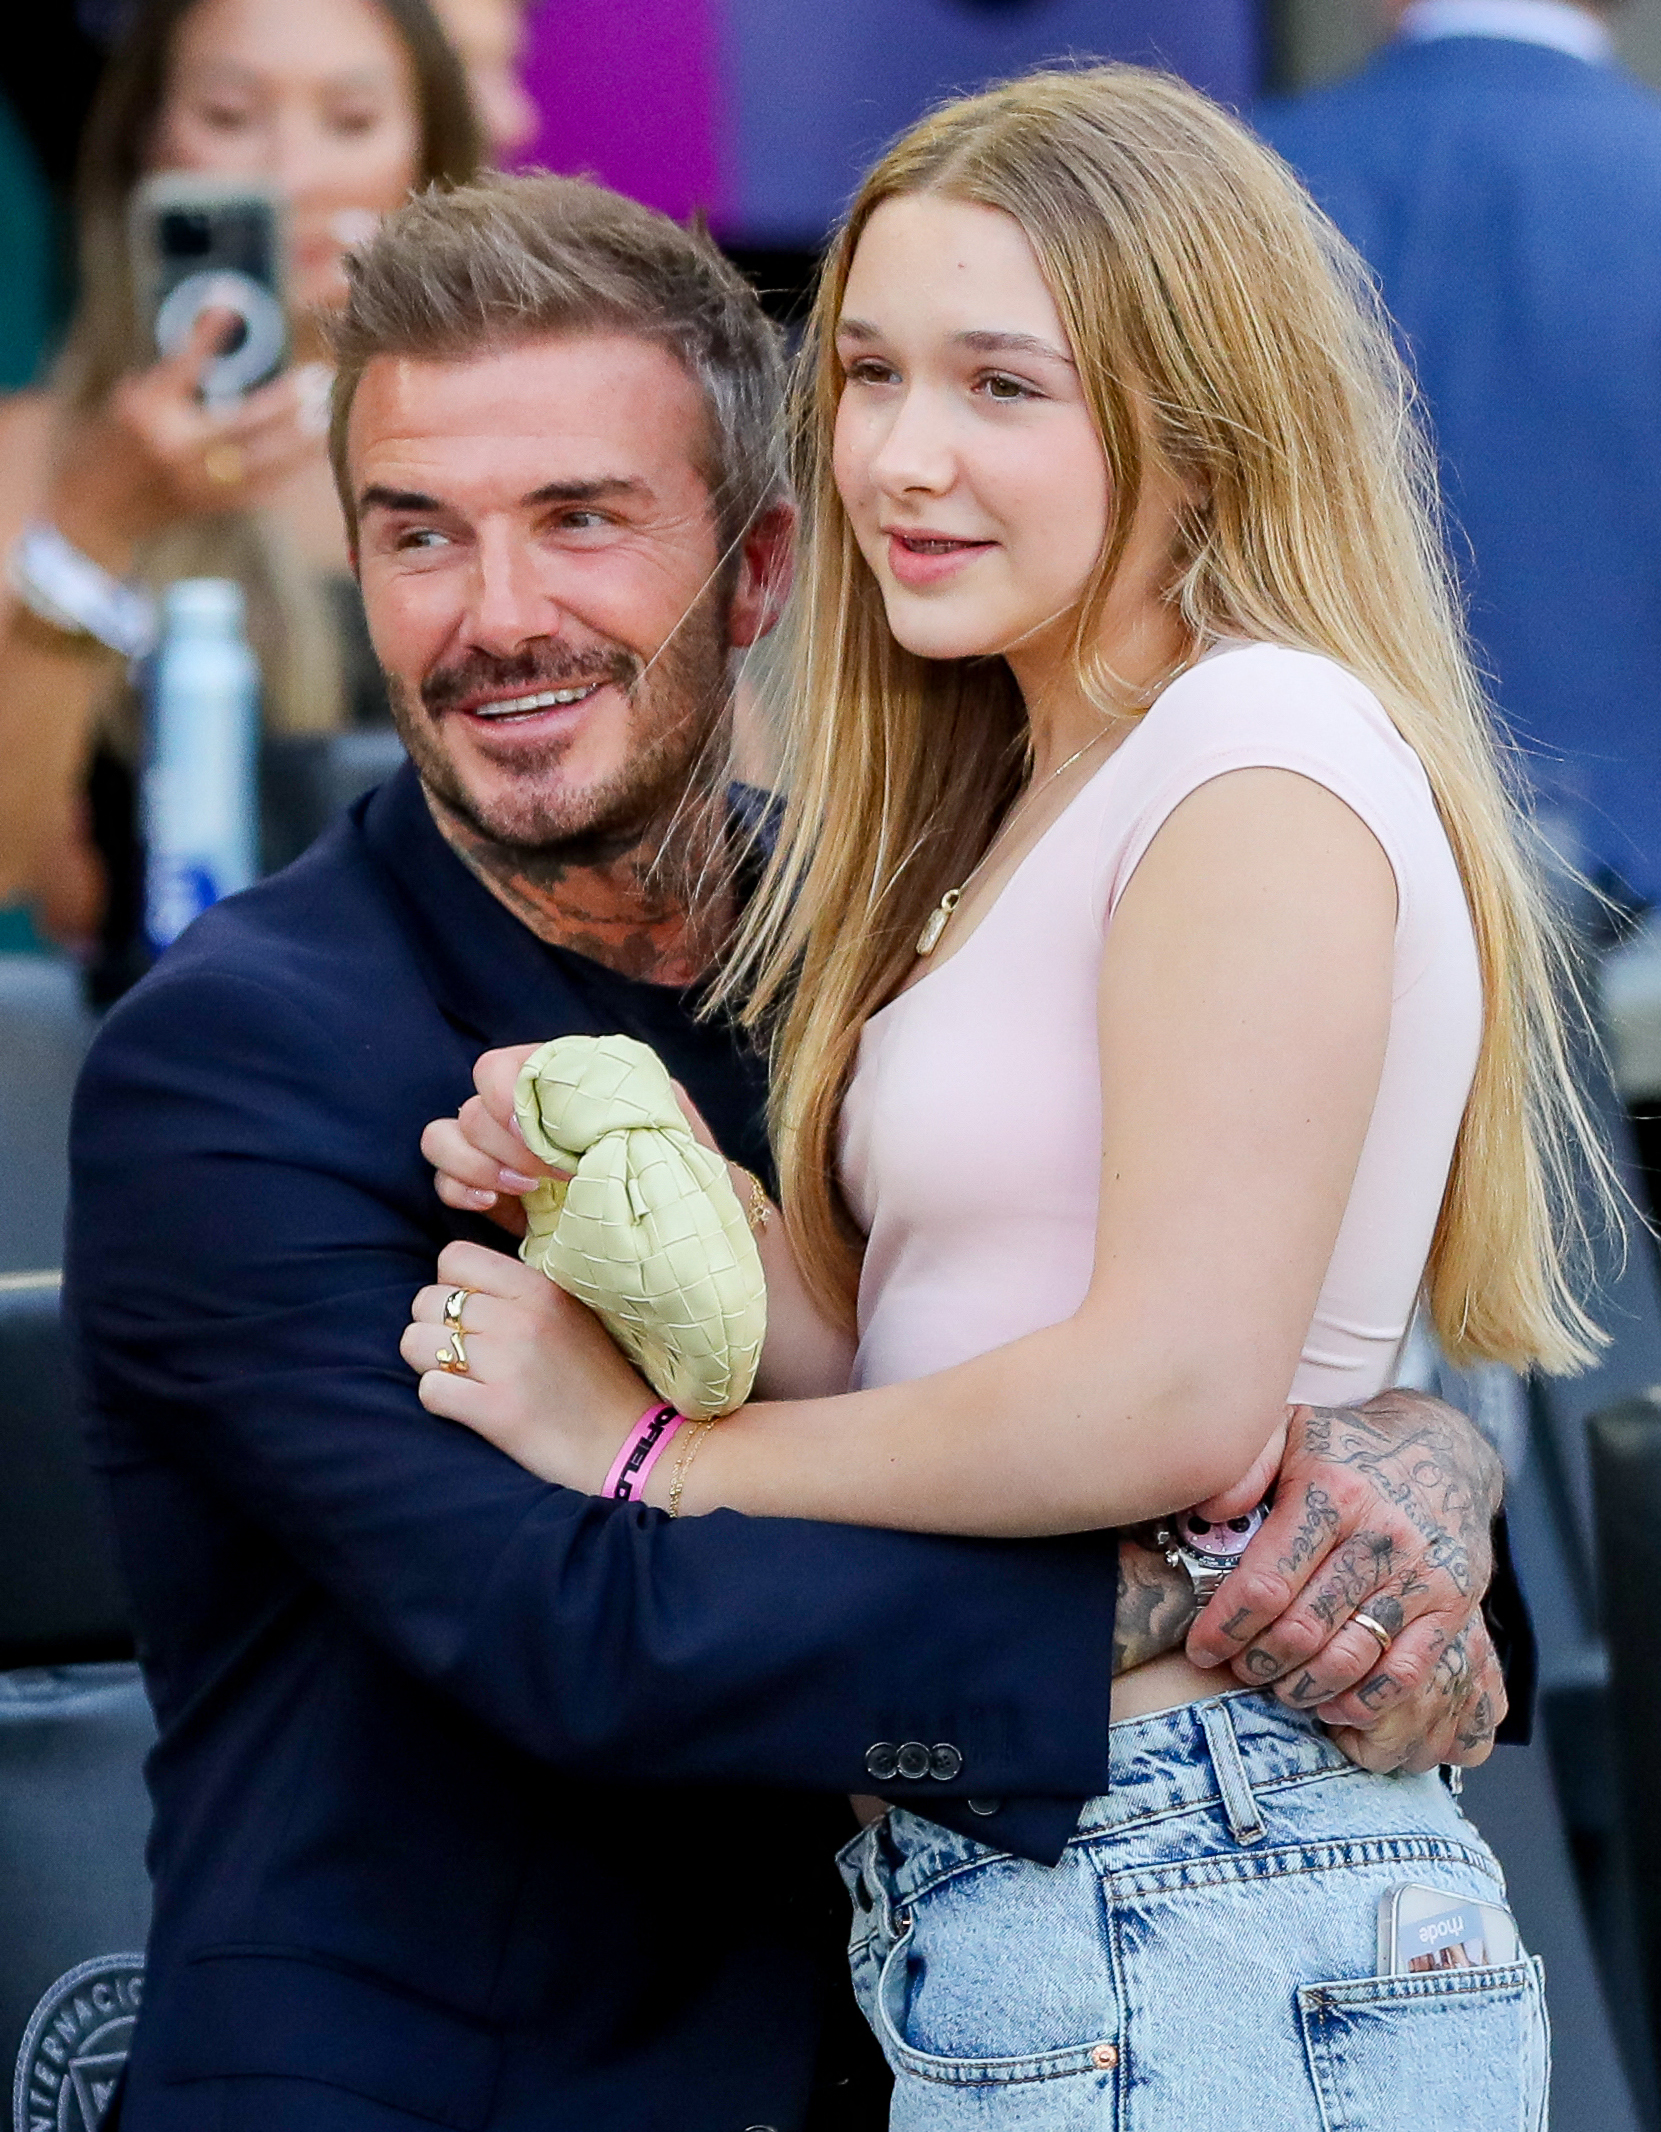 David and Harper Beckham during the Major League Soccer (MLS) regular season soccer match between Inter Miami CF and St. Louis CITY SC in Fort Lauderdale, Florida in June 1, 2024. | Source: Getty Images